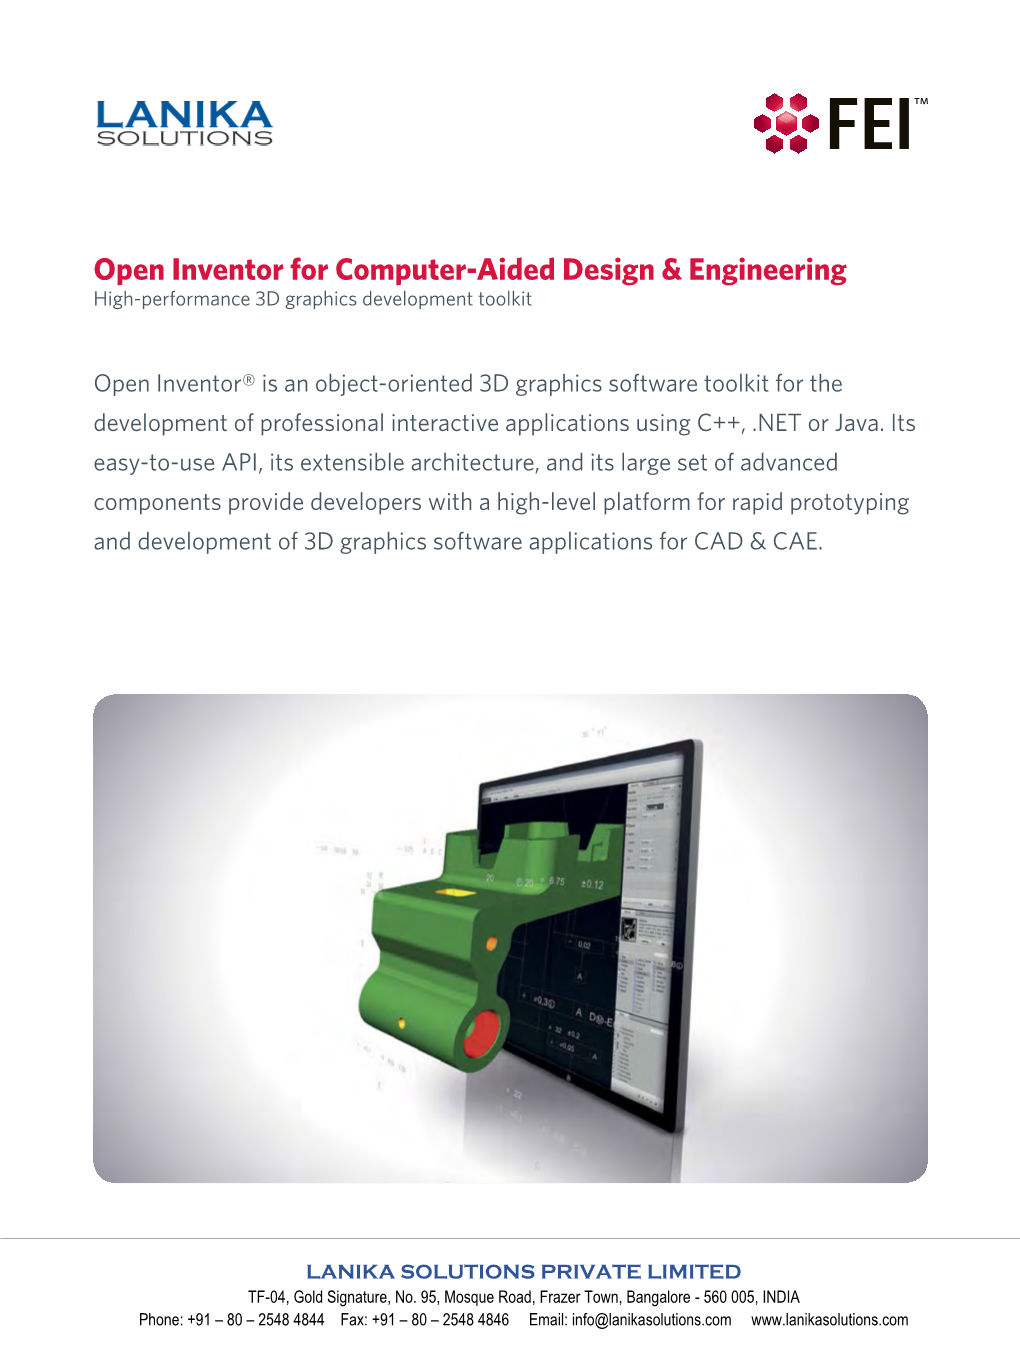 Open Inventor 3D Software Development Toolkit for CAD And